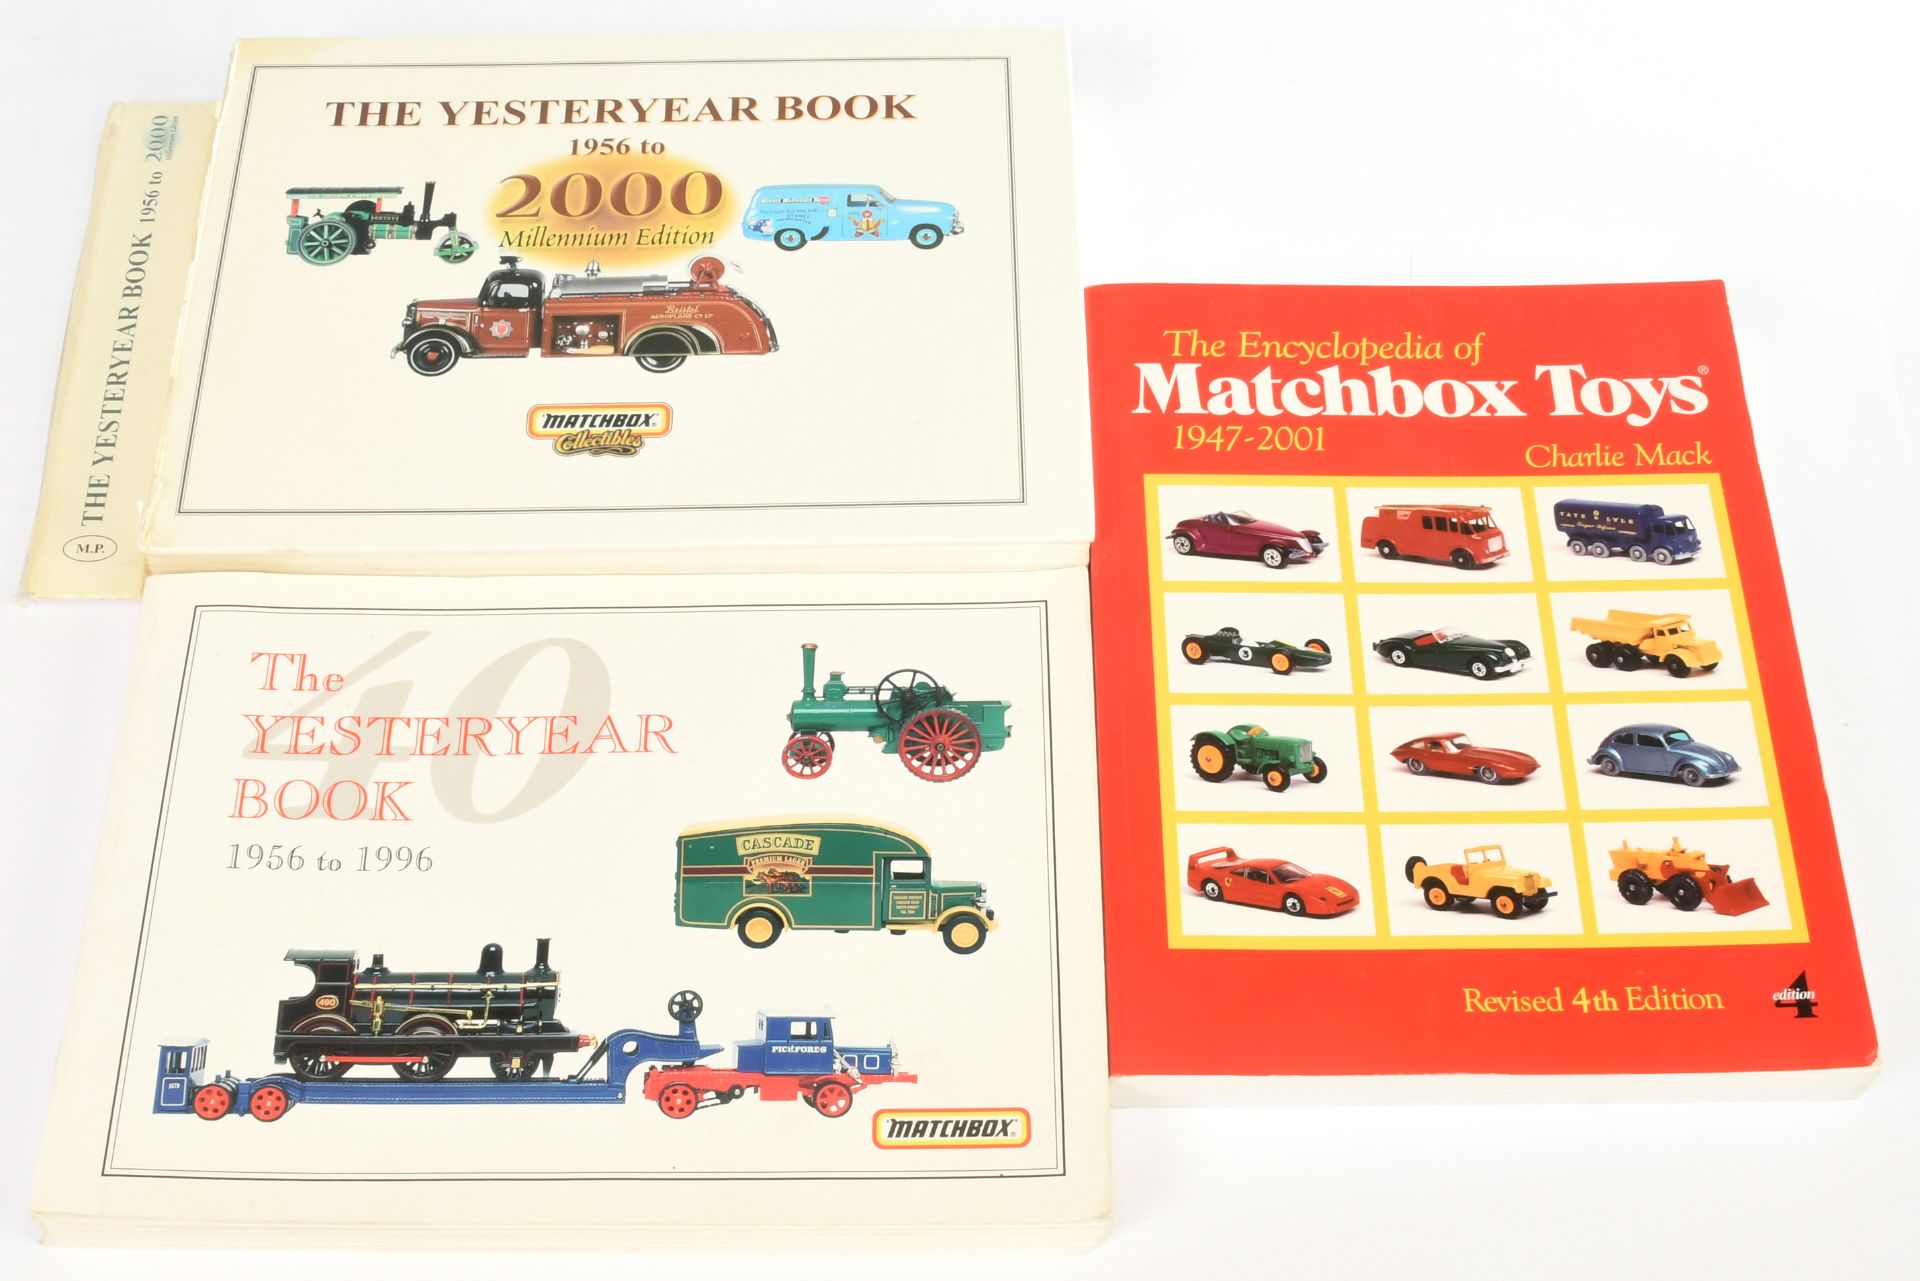 Matchbox Models of Yesteryear Collectors Reference Books - (1) Major Productions Ltd - "The Yeste...